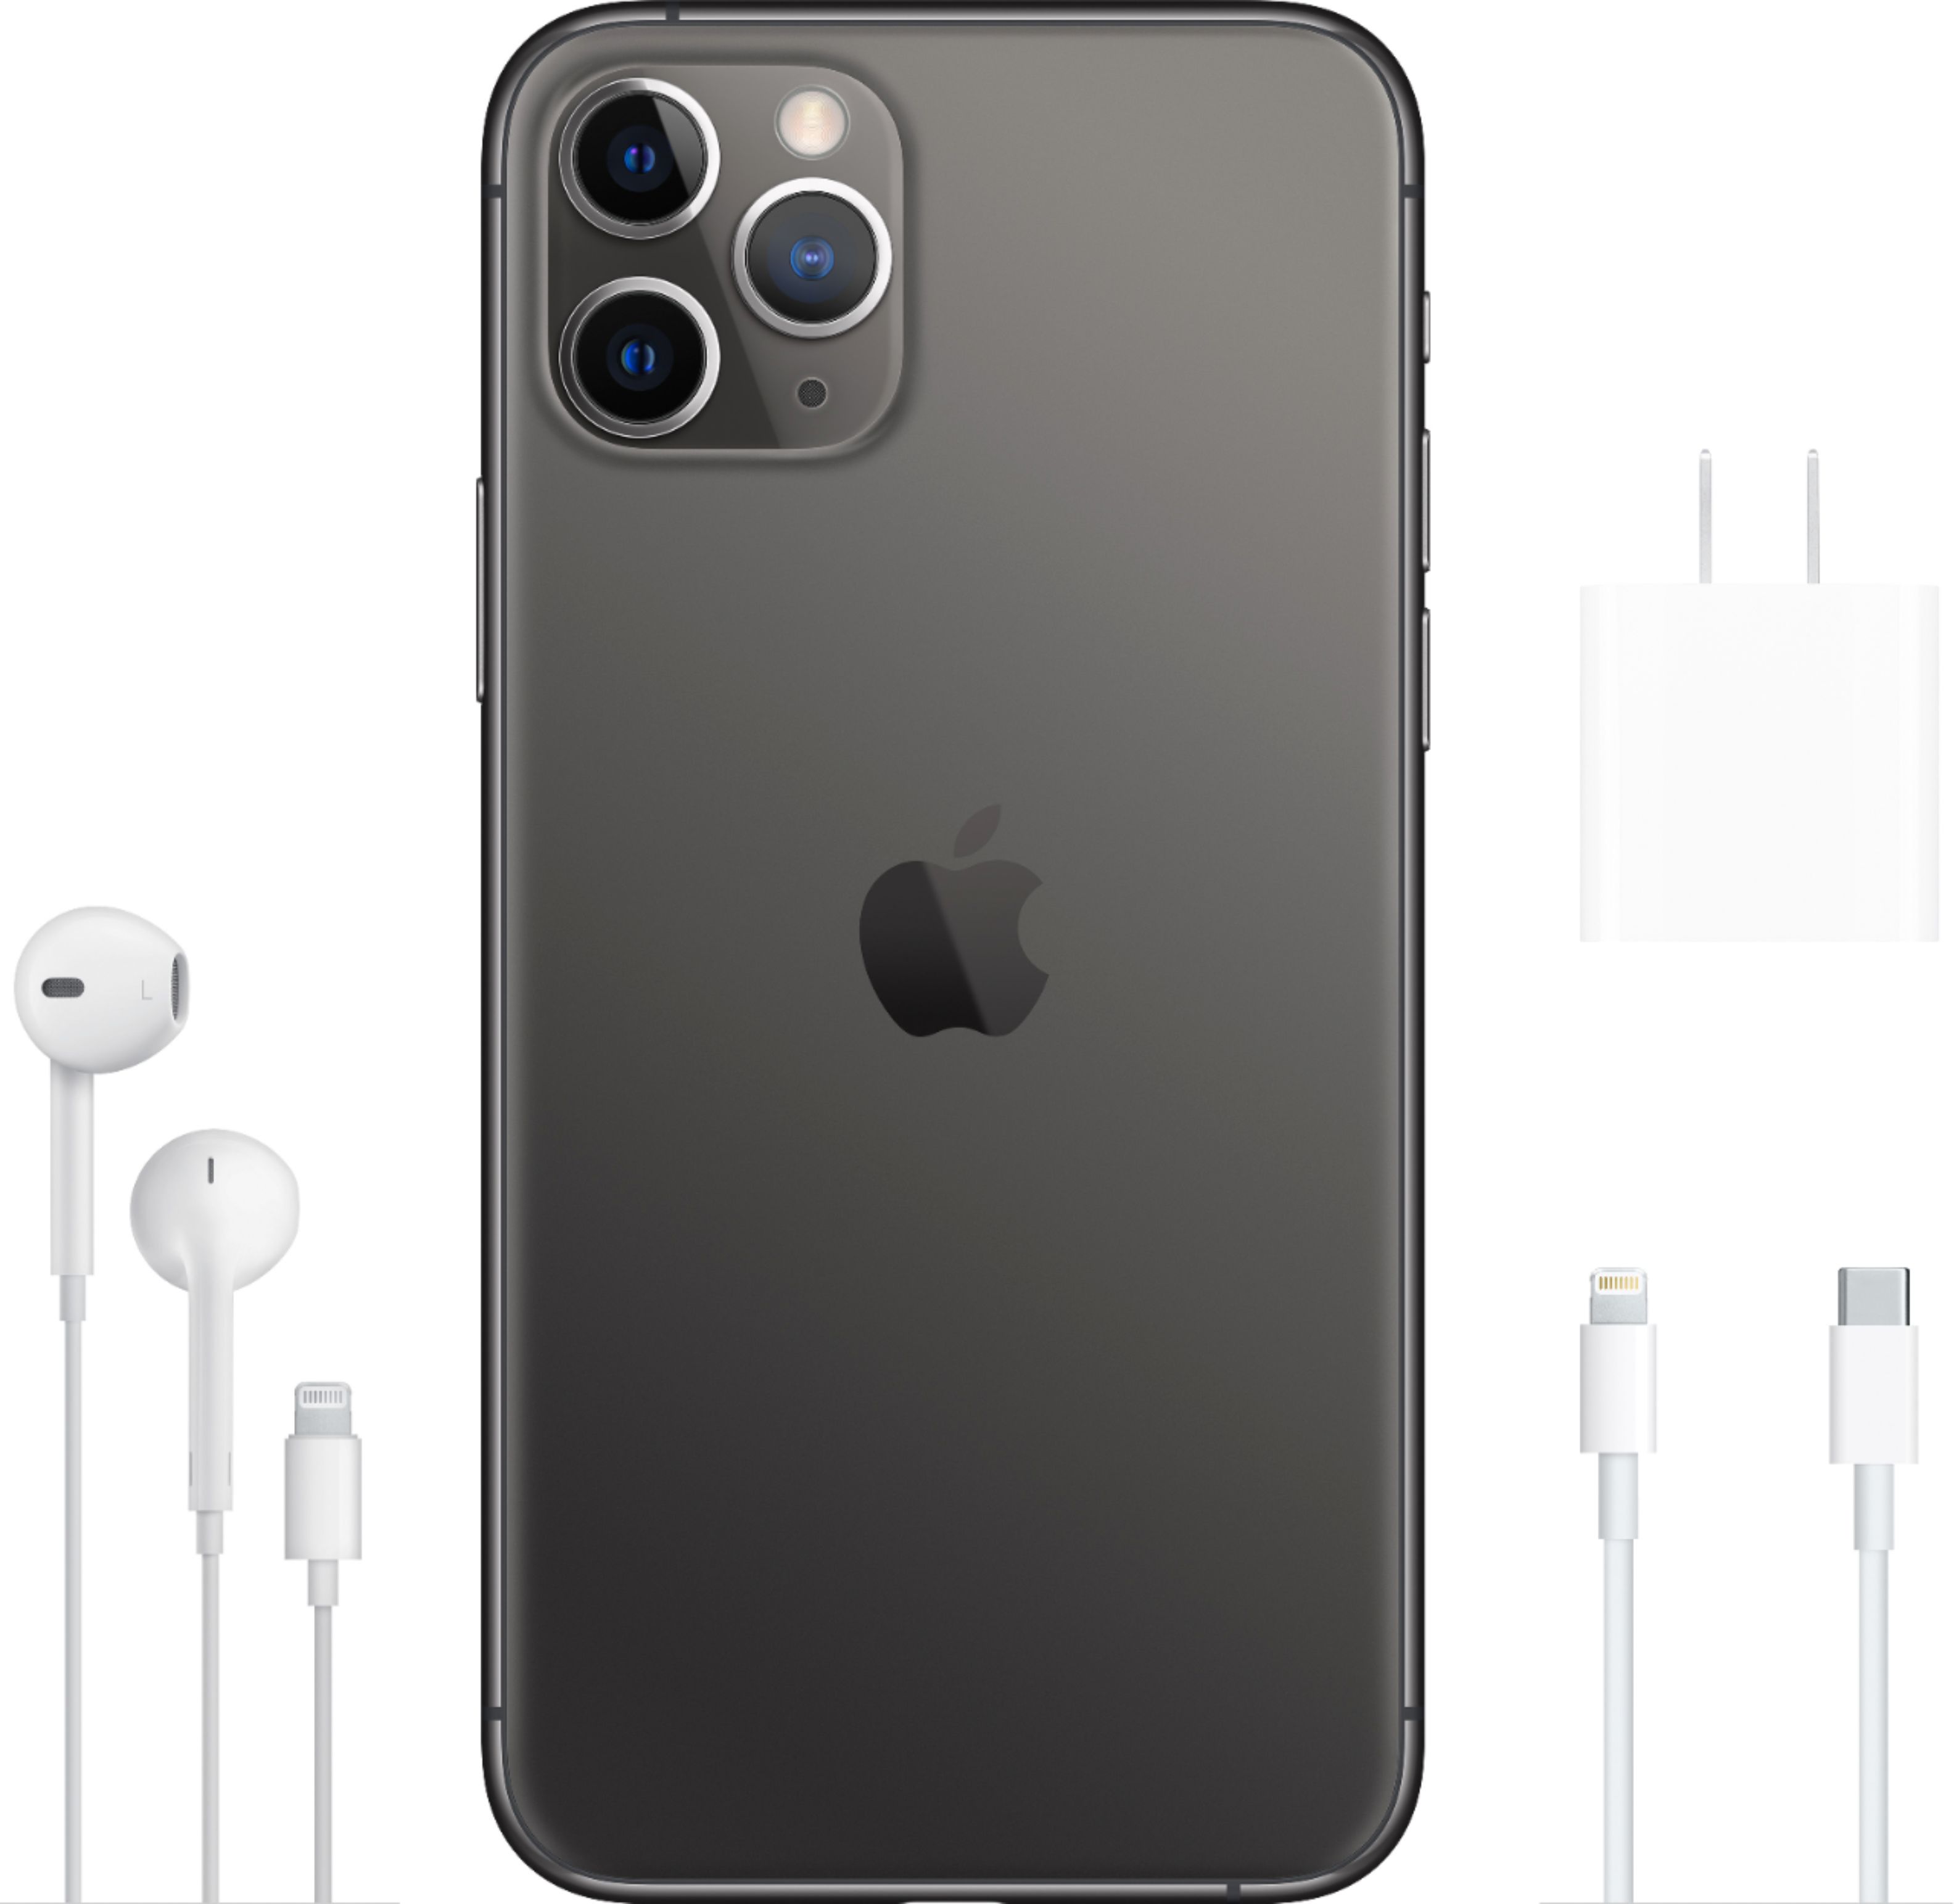 Best Buy: Apple iPhone 11 Pro 256GB Space Gray (AT&T) MWCM2LL/A